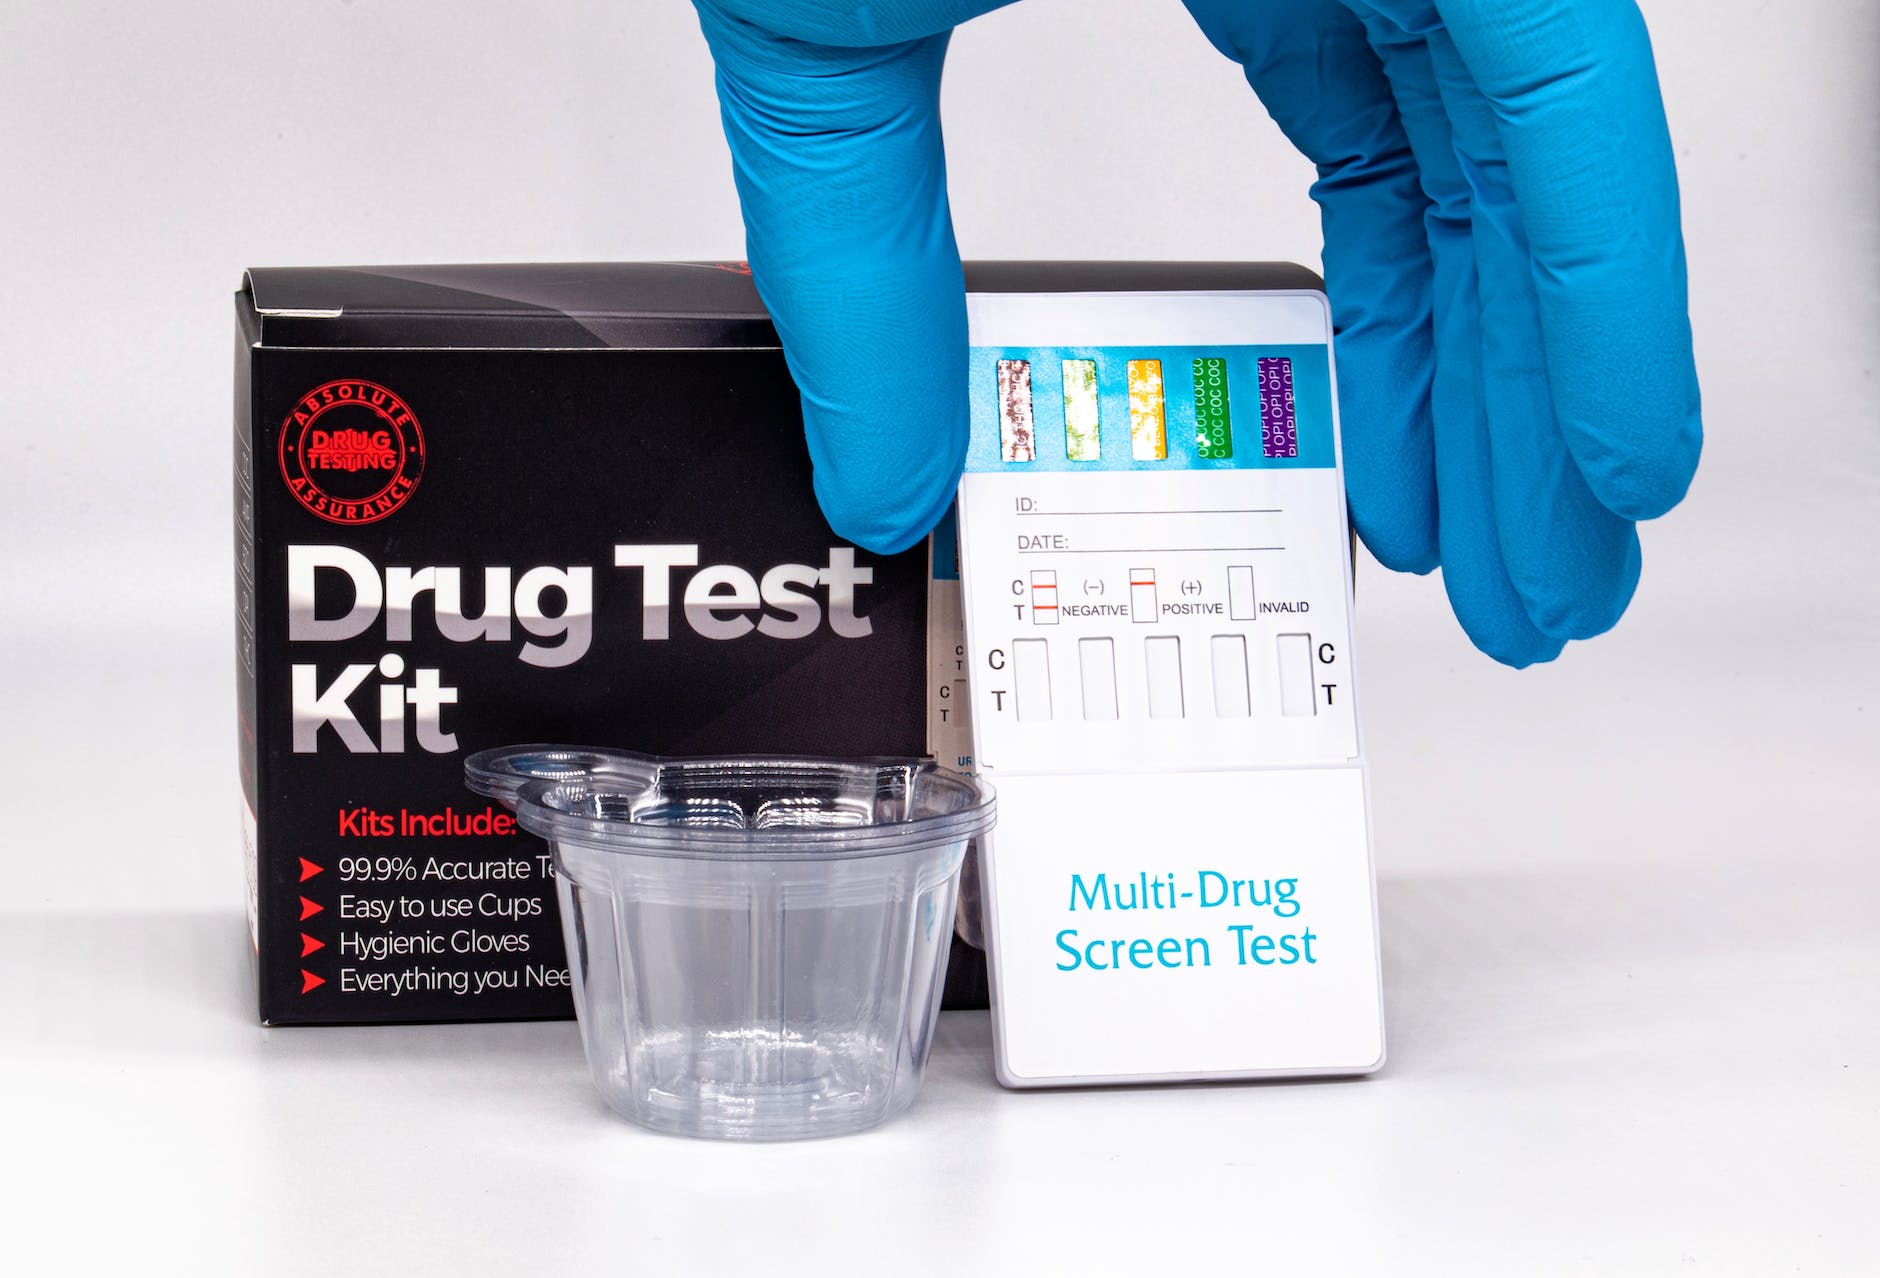 multi drug screen test and kit boxes